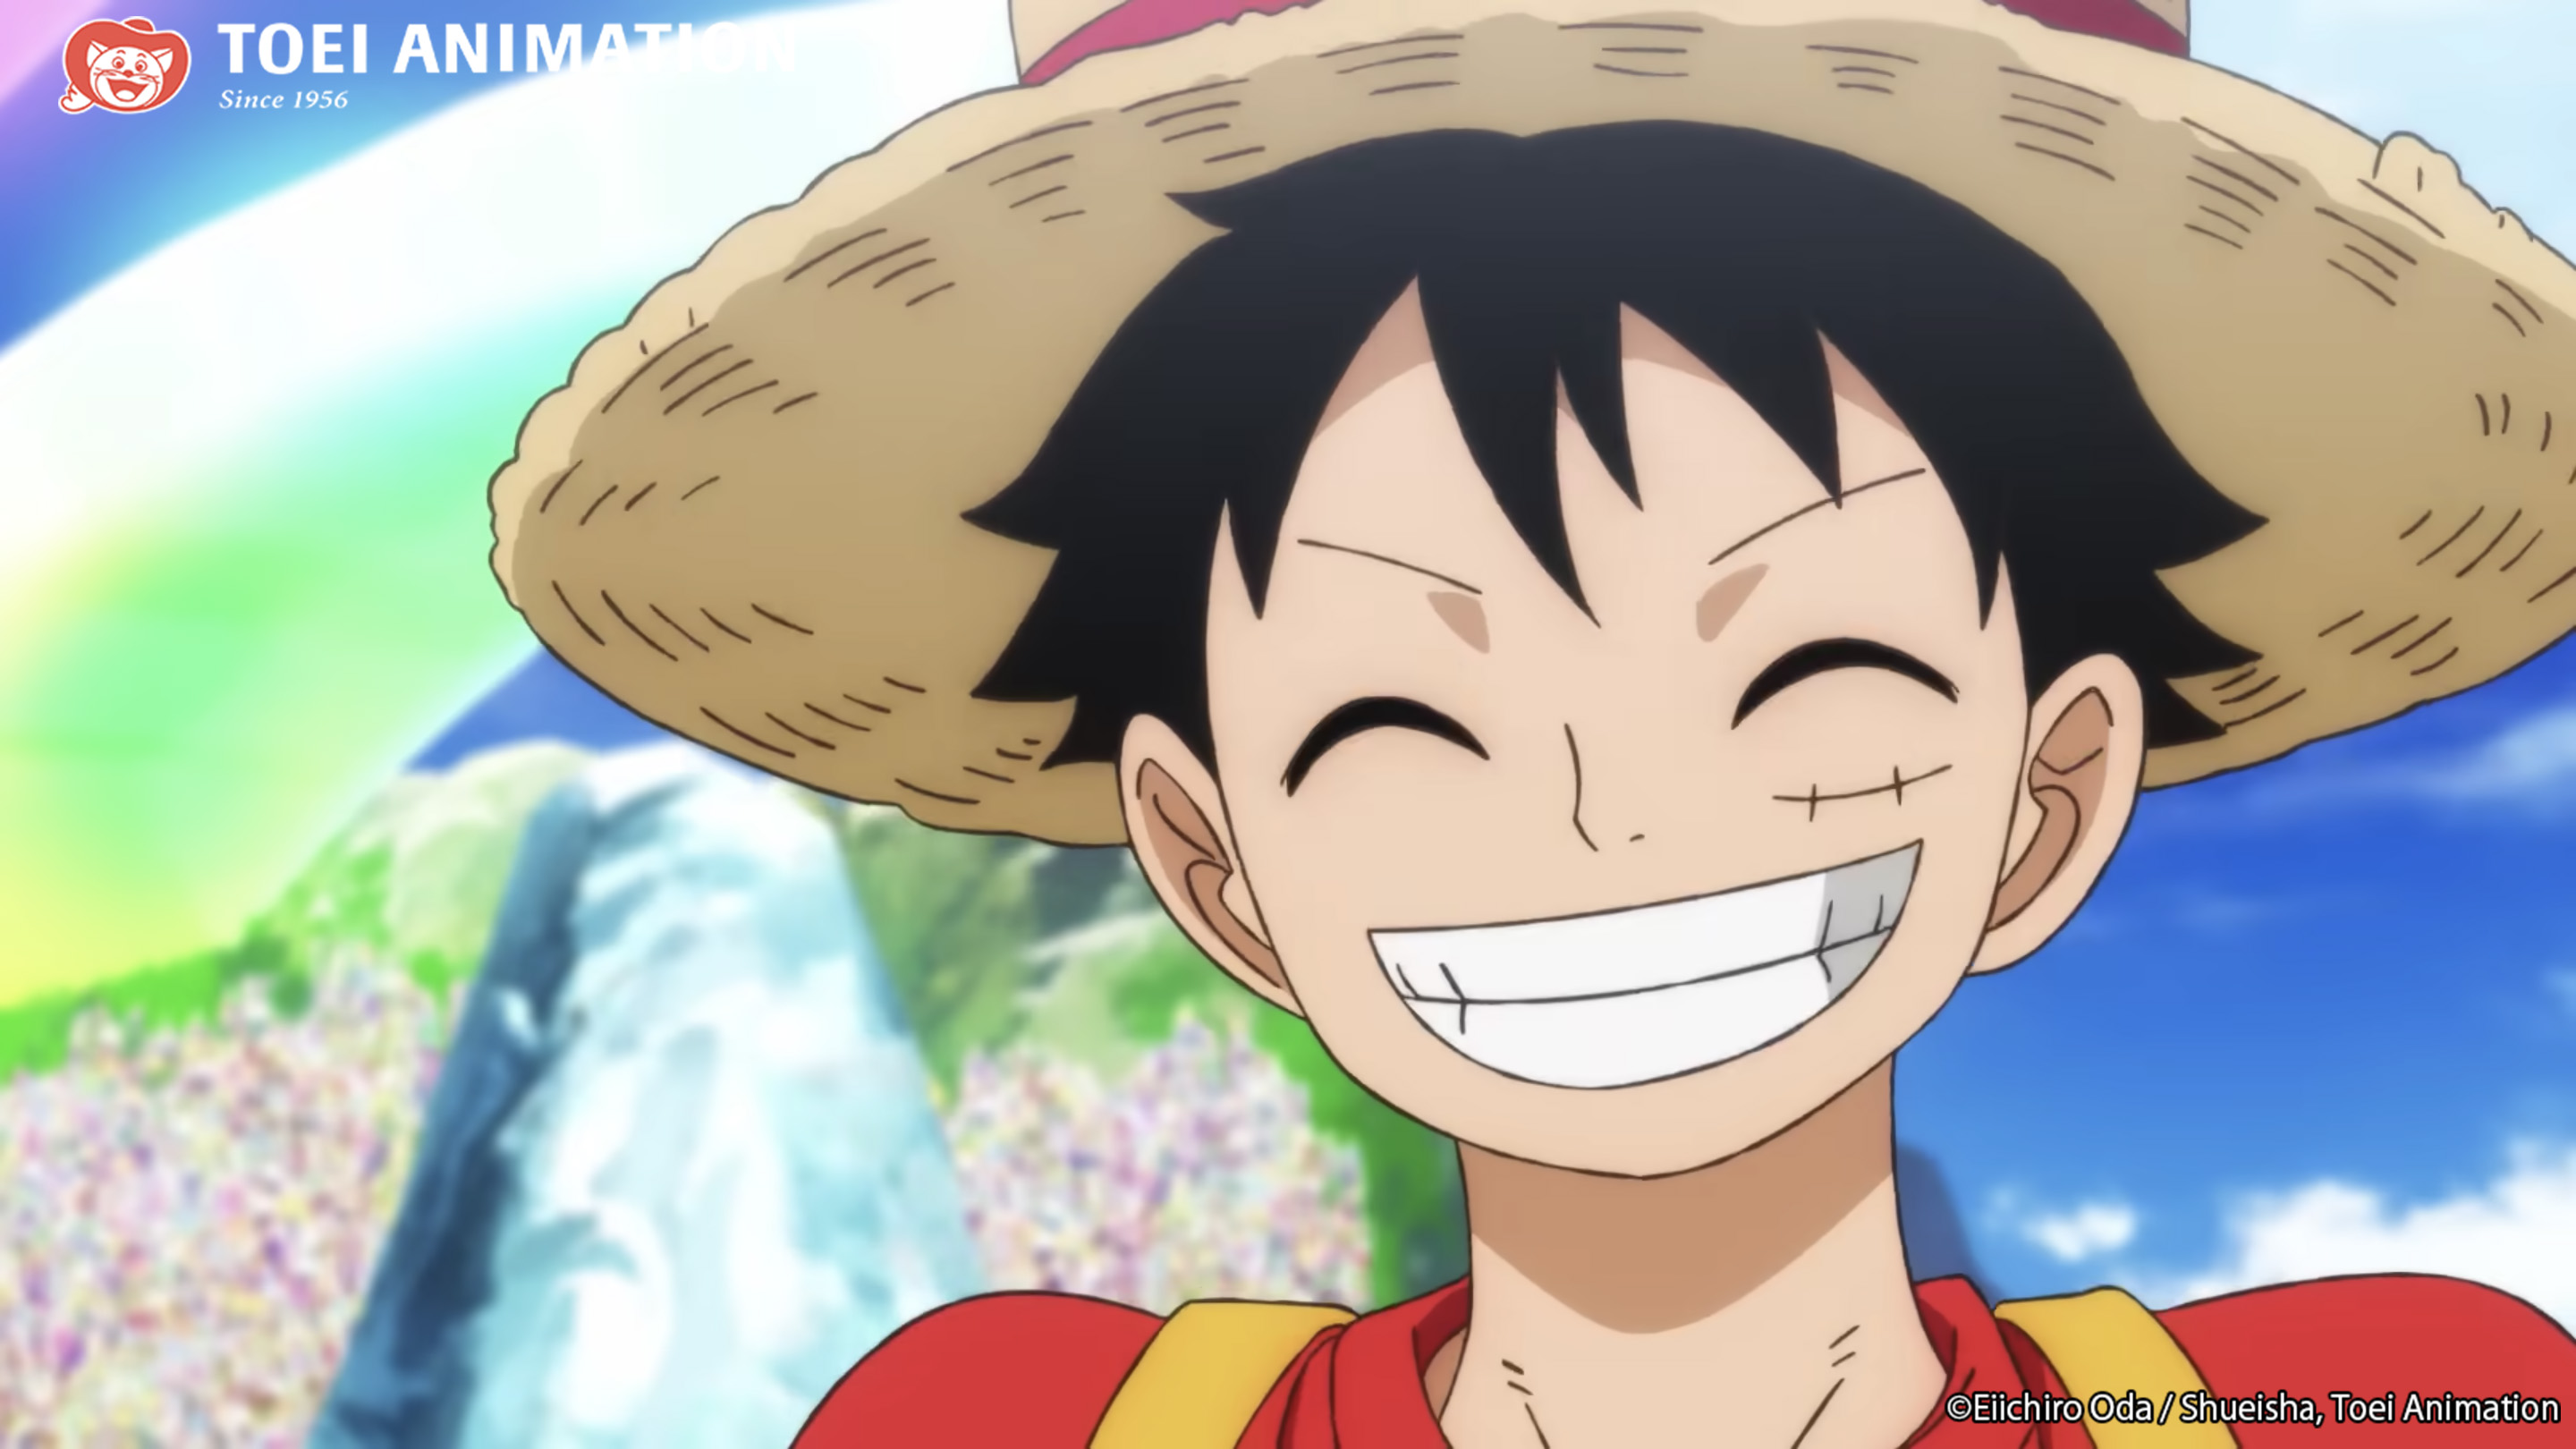 Crunchyroll - One Piece Film: Red Climbs to 9th Highest-Grossing Anime Film  of All-Time in Japan